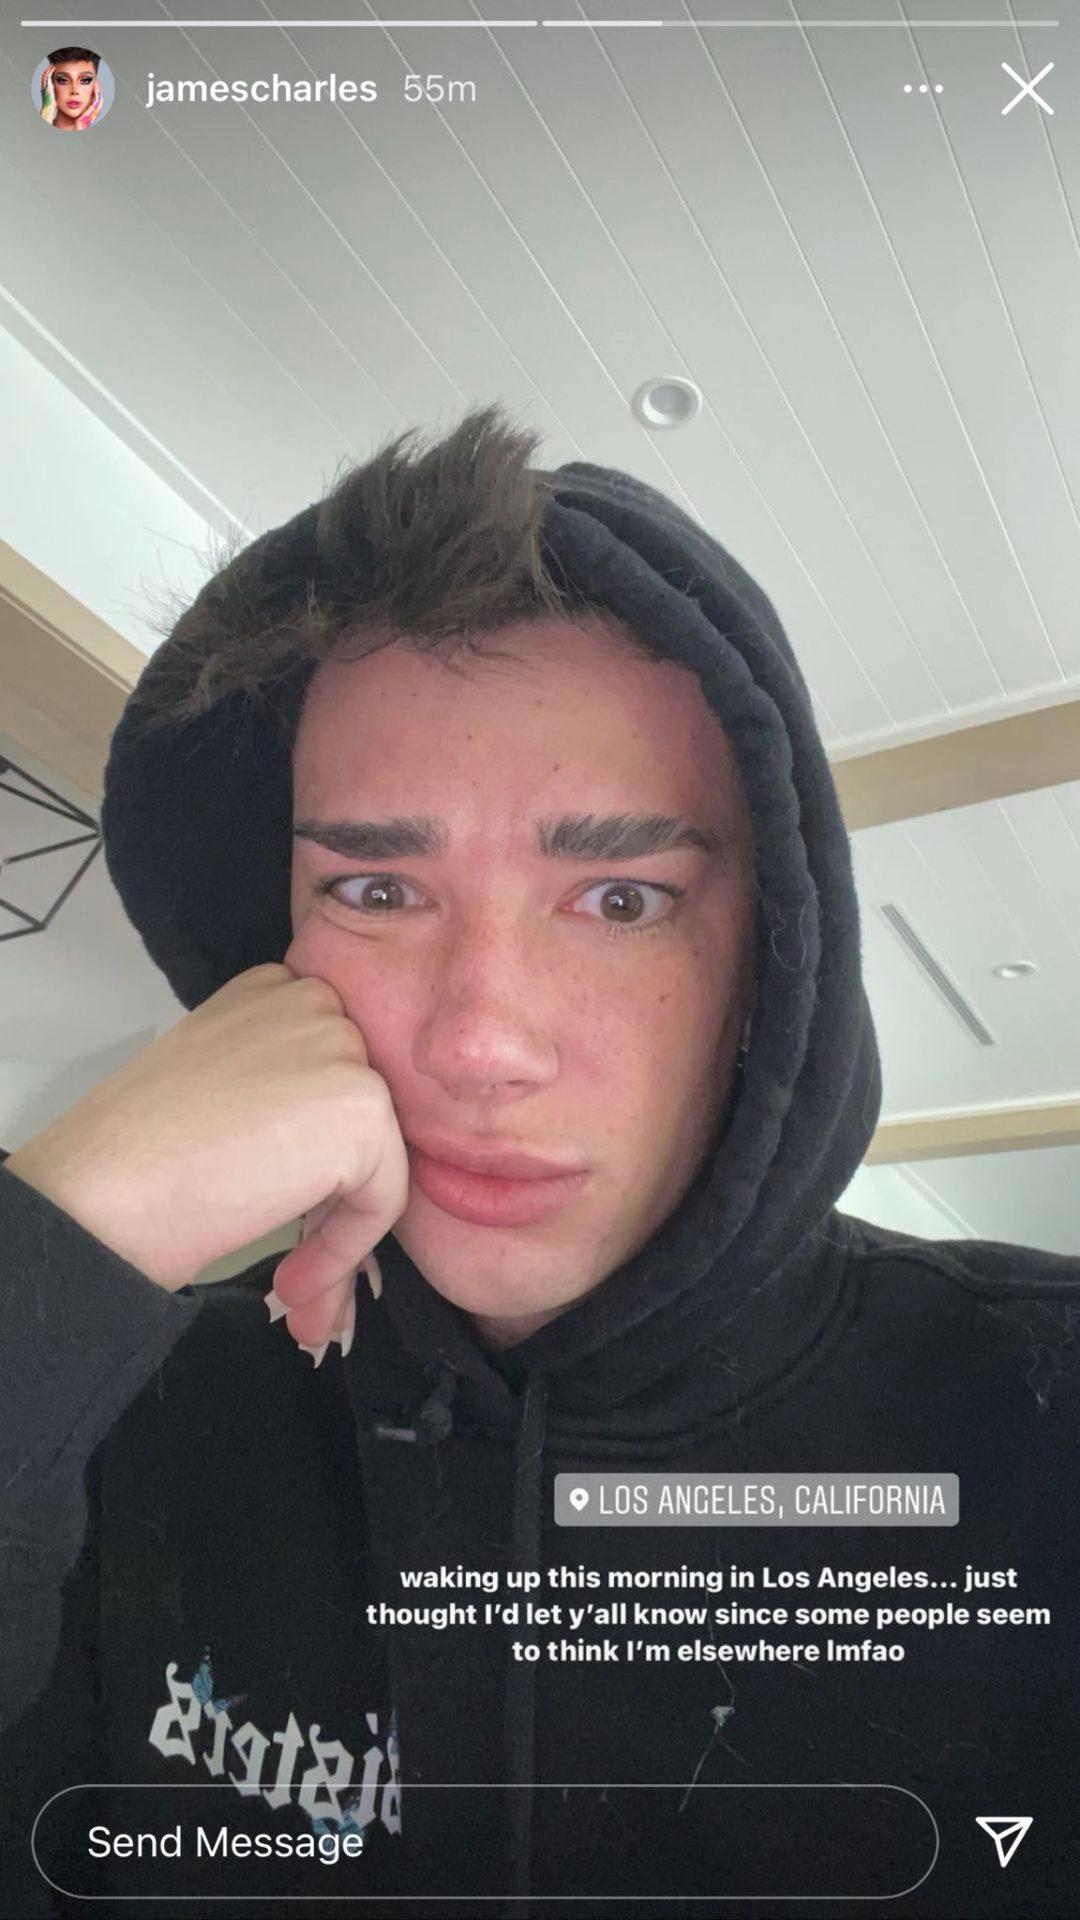 James Charles clarifies that he is not in the Bahamas